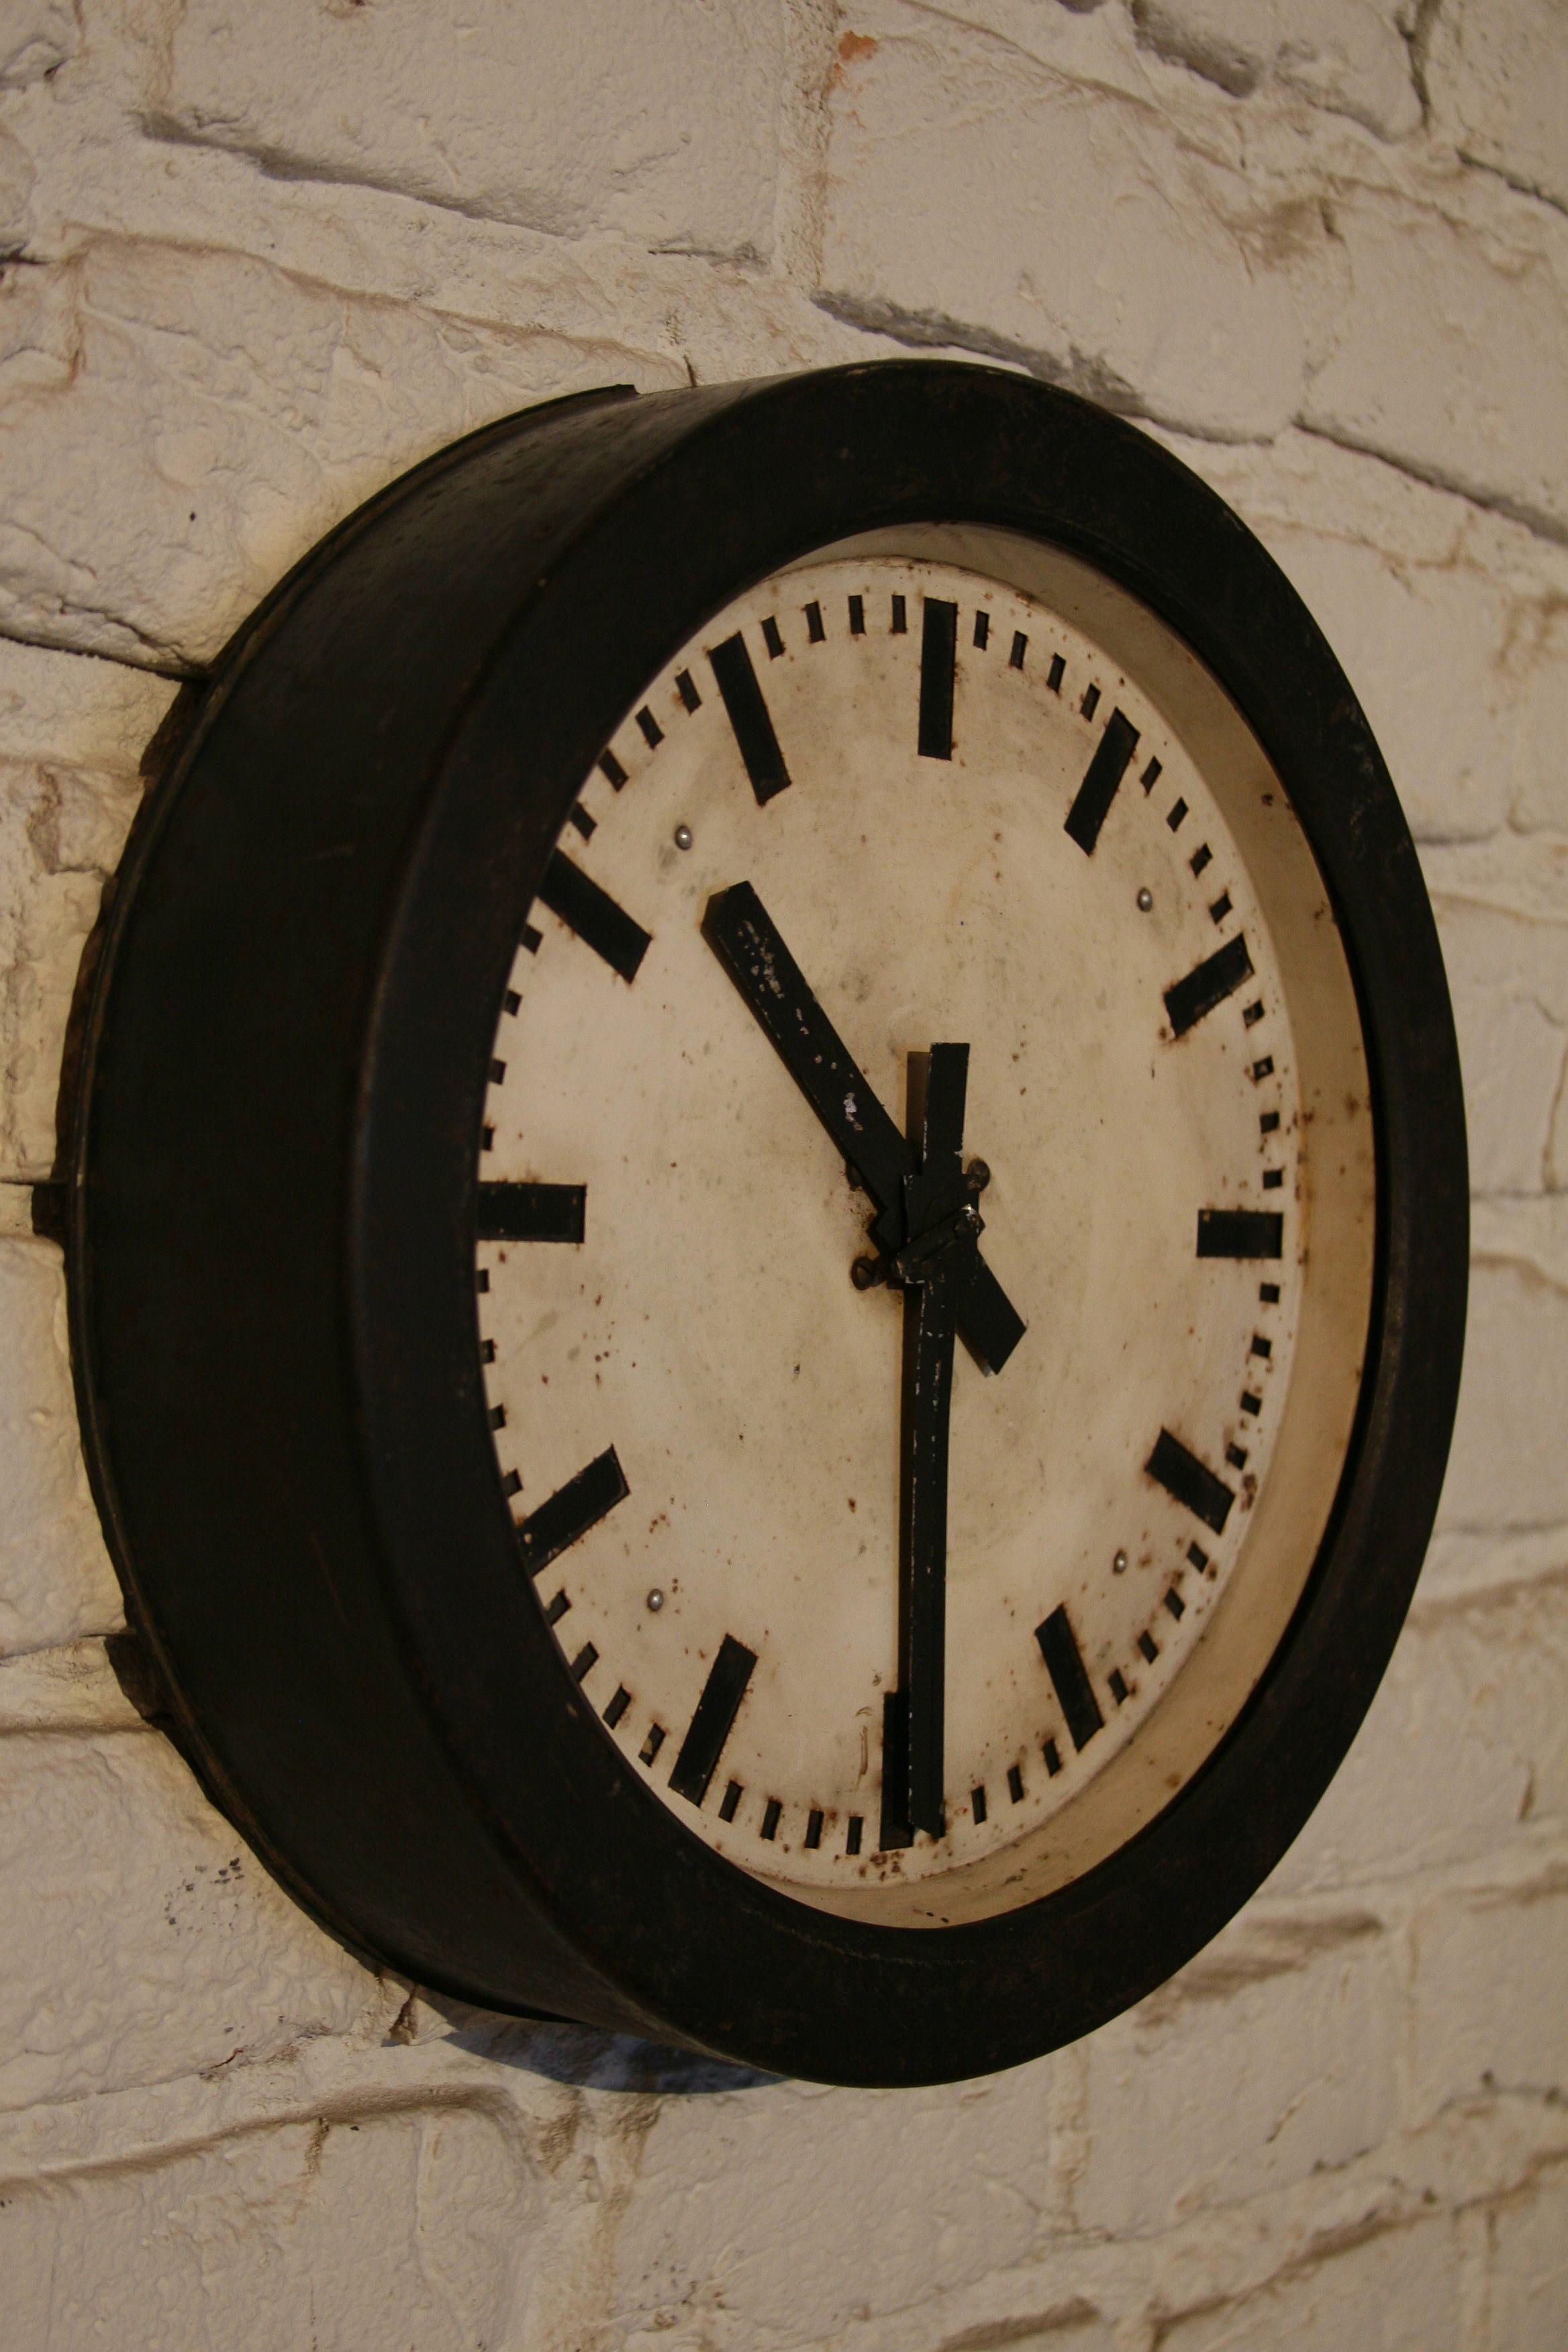 Original Polish factory clock manufactured at the turn of the 1950s and 1960s.
Construction:
A cover and a dial are made of pressed steel sheet covered with varnish. A classic mechanism powered directly by 220V mains voltage - does not require